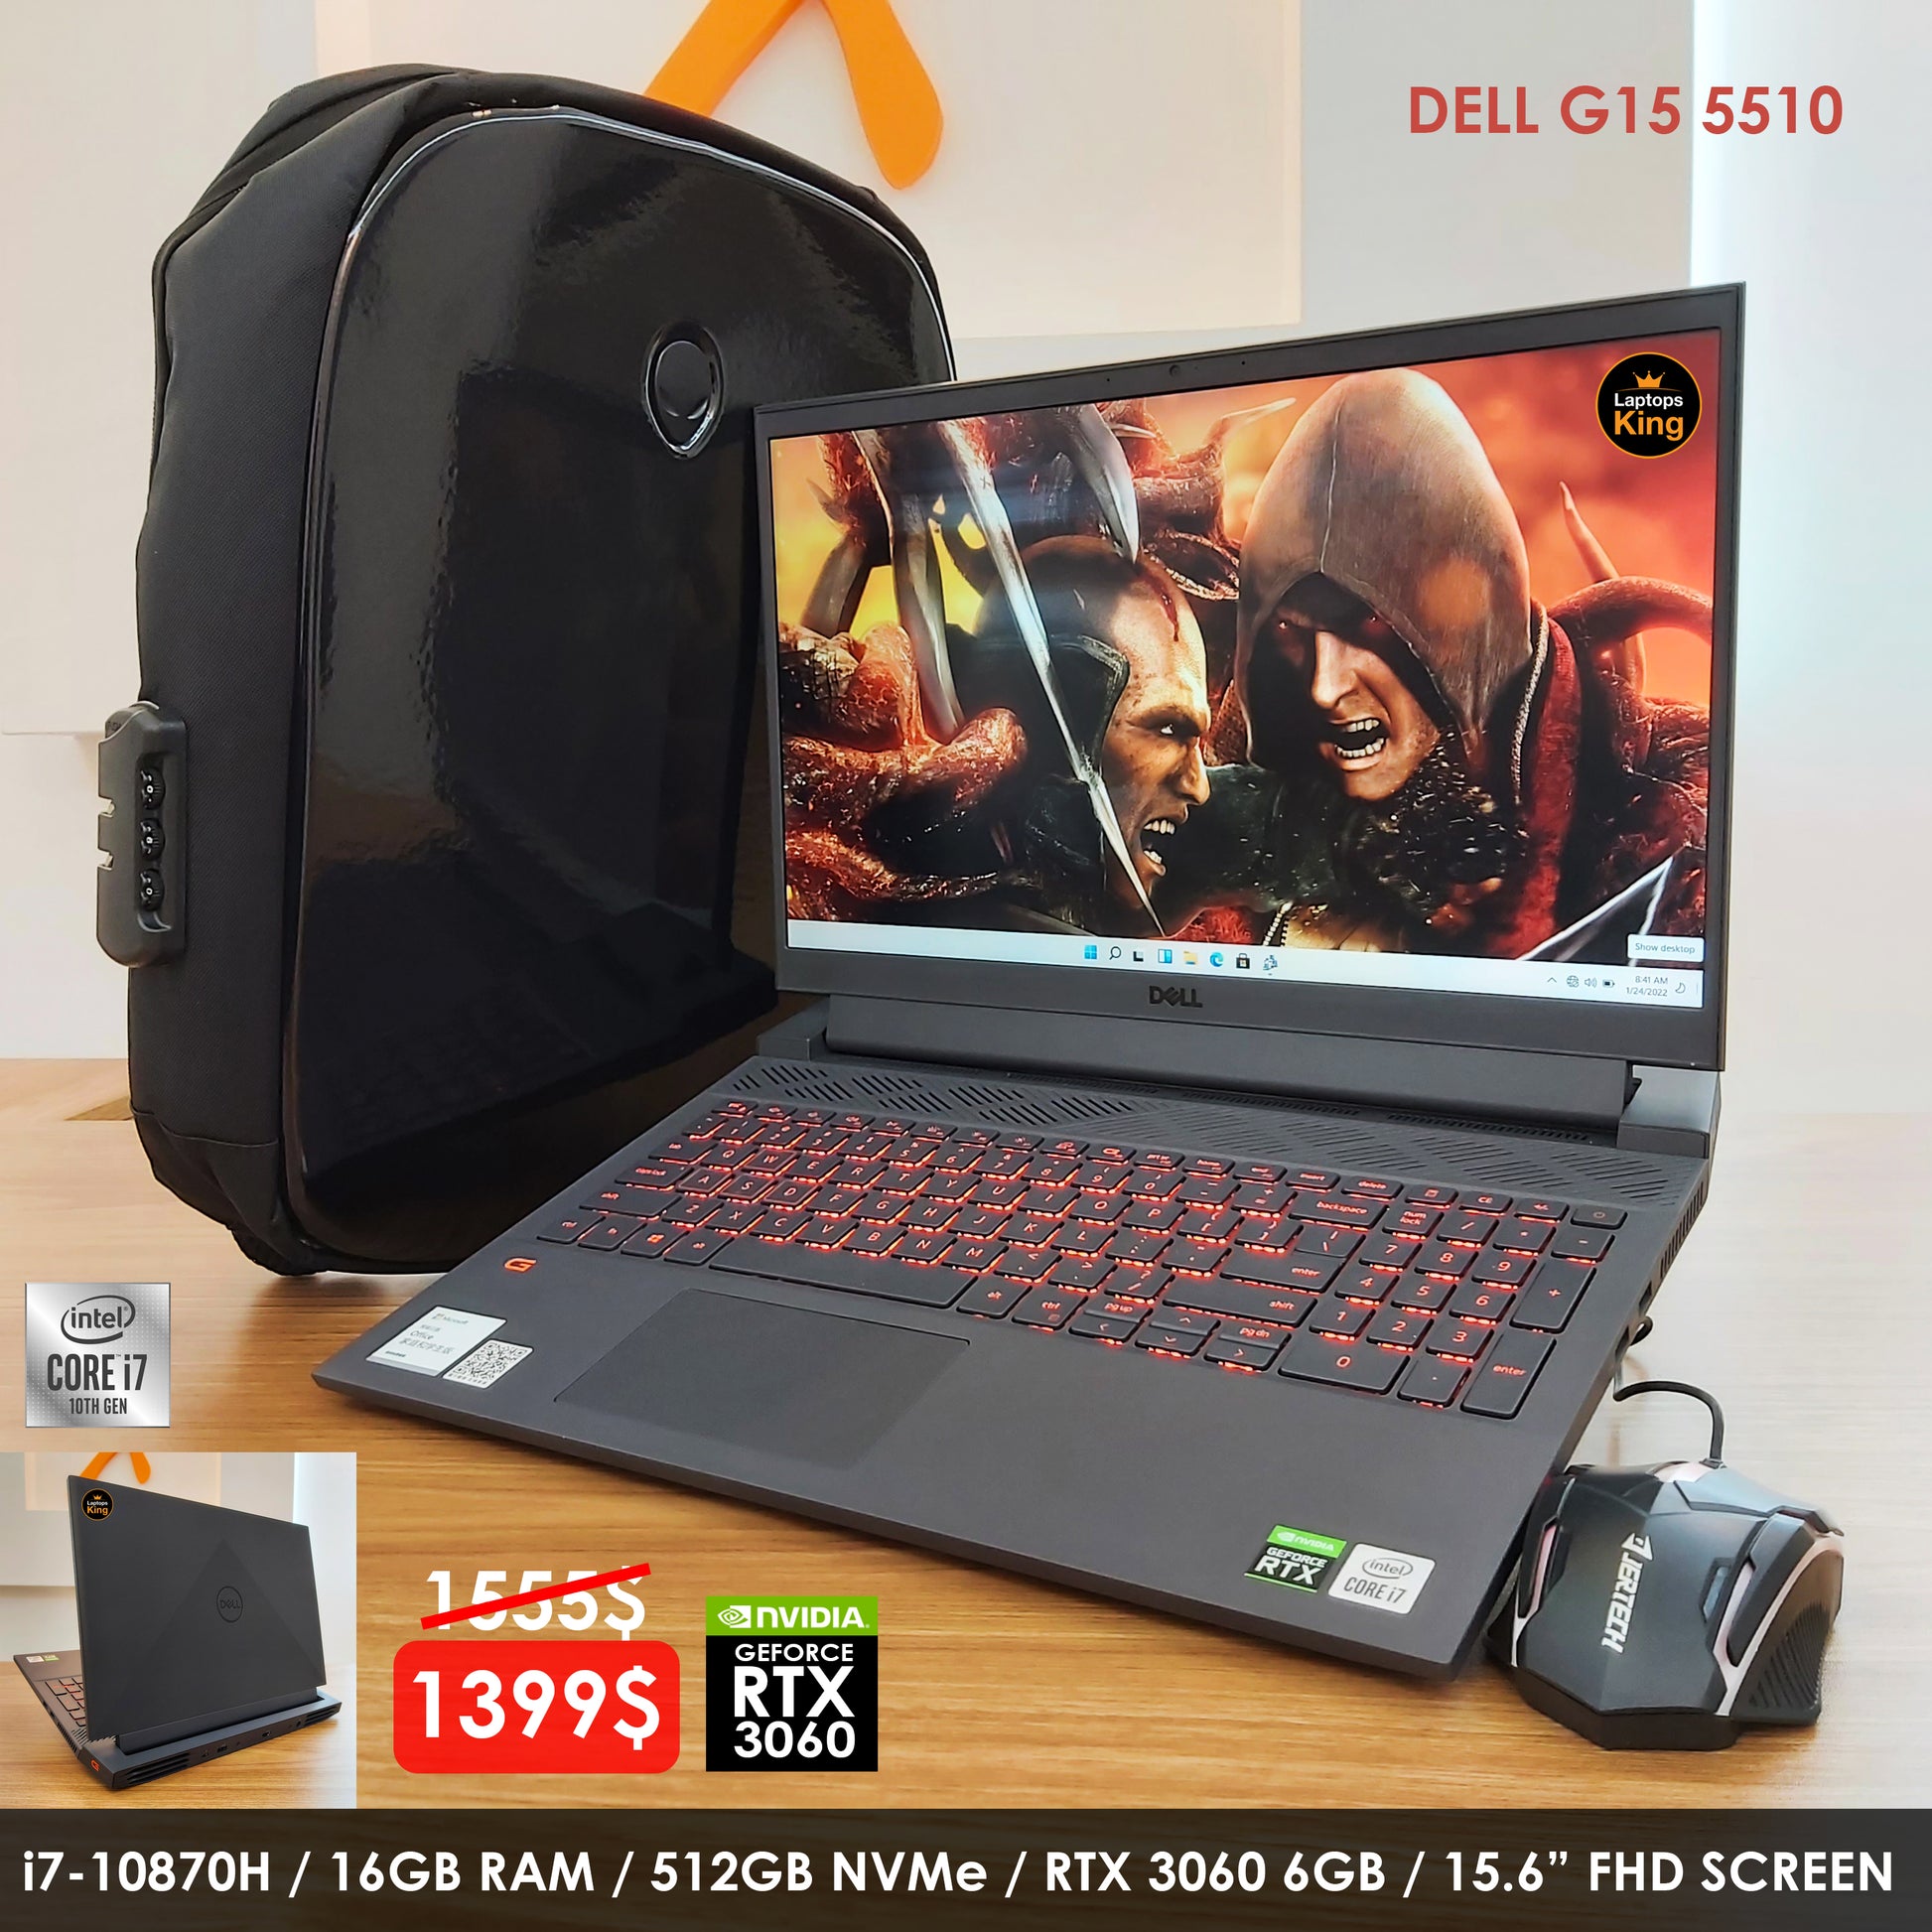 Dell G15 5510 RTX 3060 Gaming Laptop (Brand New), Gaming laptop, Graphic Design laptop, best laptop for gaming, Best laptop for graphic design, computer for sale Lebanon, laptop for video editing in Lebanon, laptop for sale Lebanon, Best graphic design laptop,	Best video editing laptop, Best programming laptop, laptop for sale in Lebanon, laptops for sale in Lebanon, laptop for sale in Lebanon, buy computer Lebanon, buy laptop Lebanon.